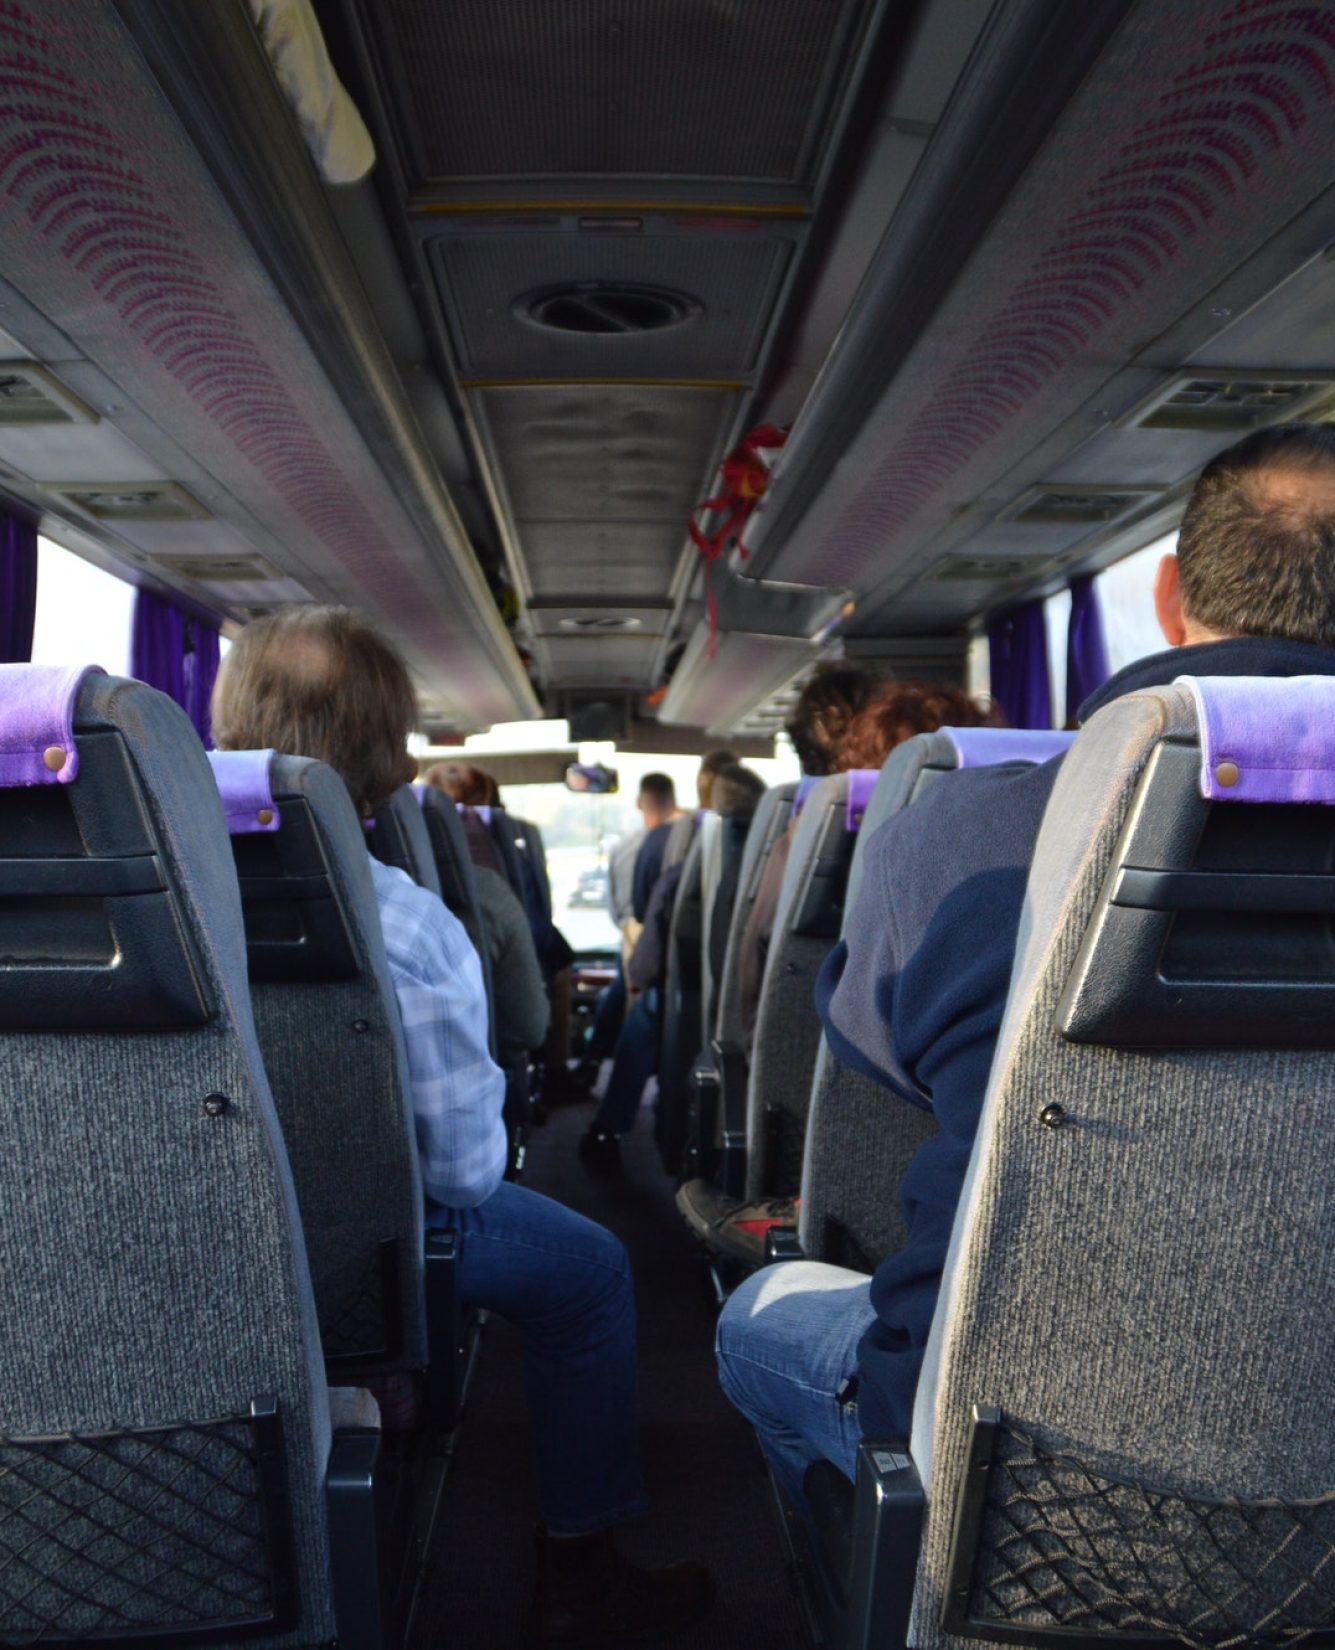 rear-view-of-passengers-on-the-bus.jpg